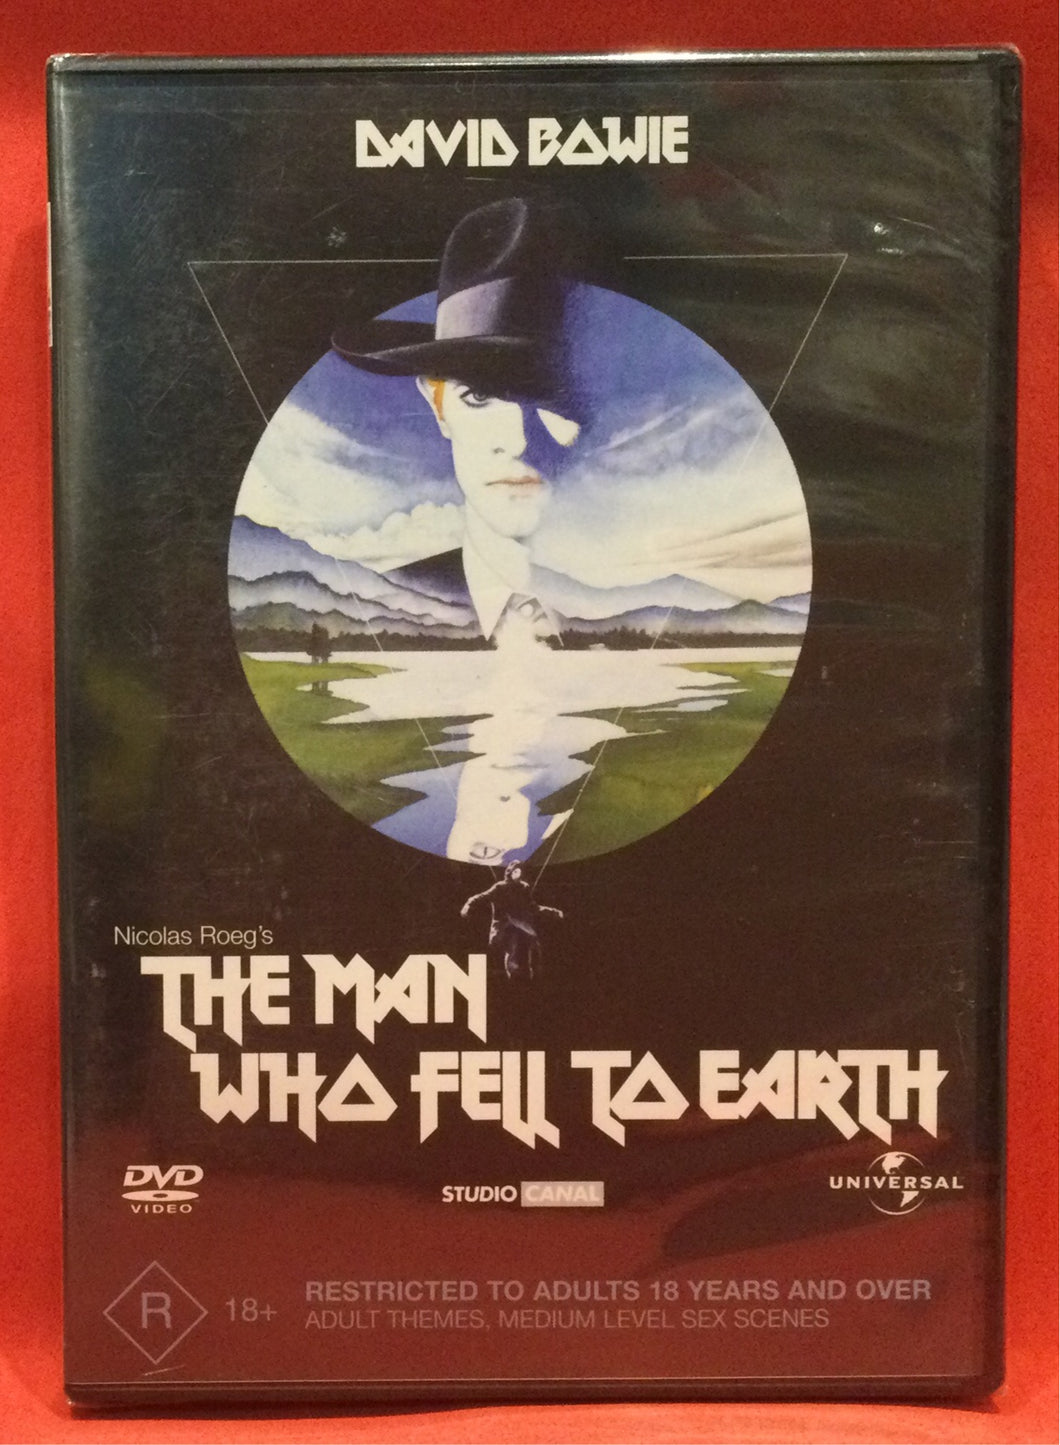 DAVID BOWIE MAN WHO FELL TO EARTH DVD